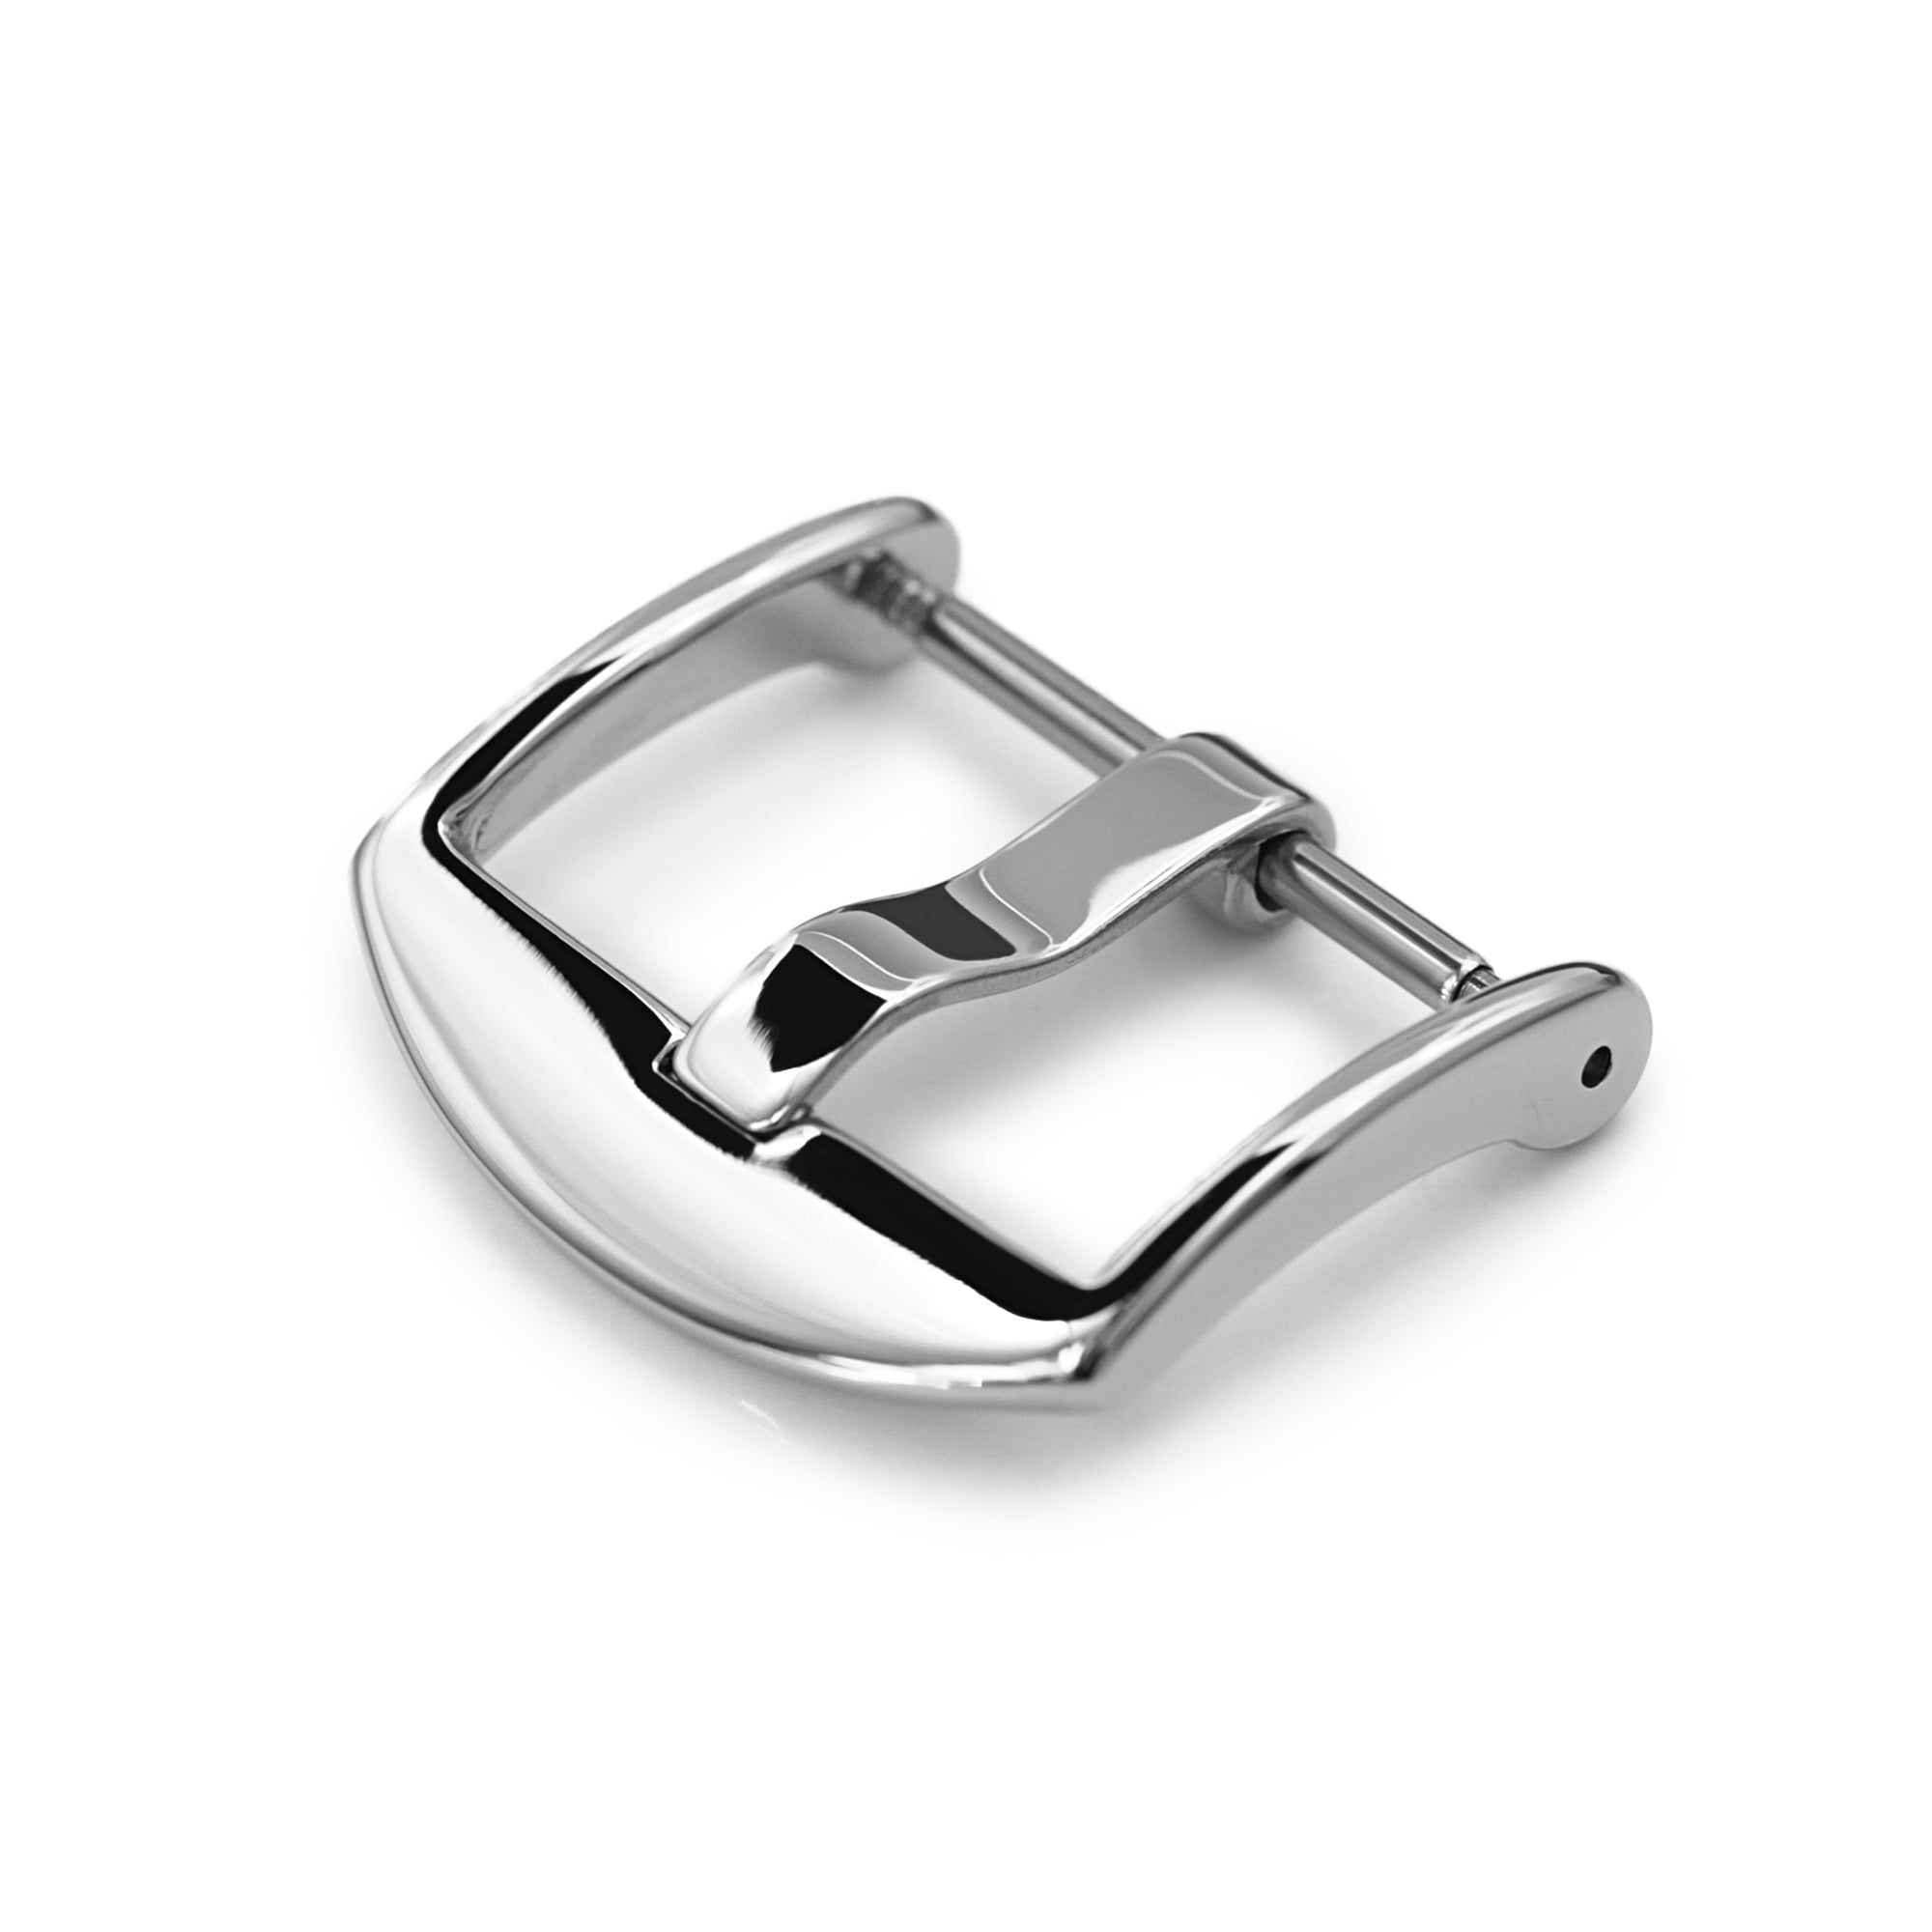 20mm, 22mm Top Quality Stainless Steel 316L Spring Bar type Buckle, Polished finish